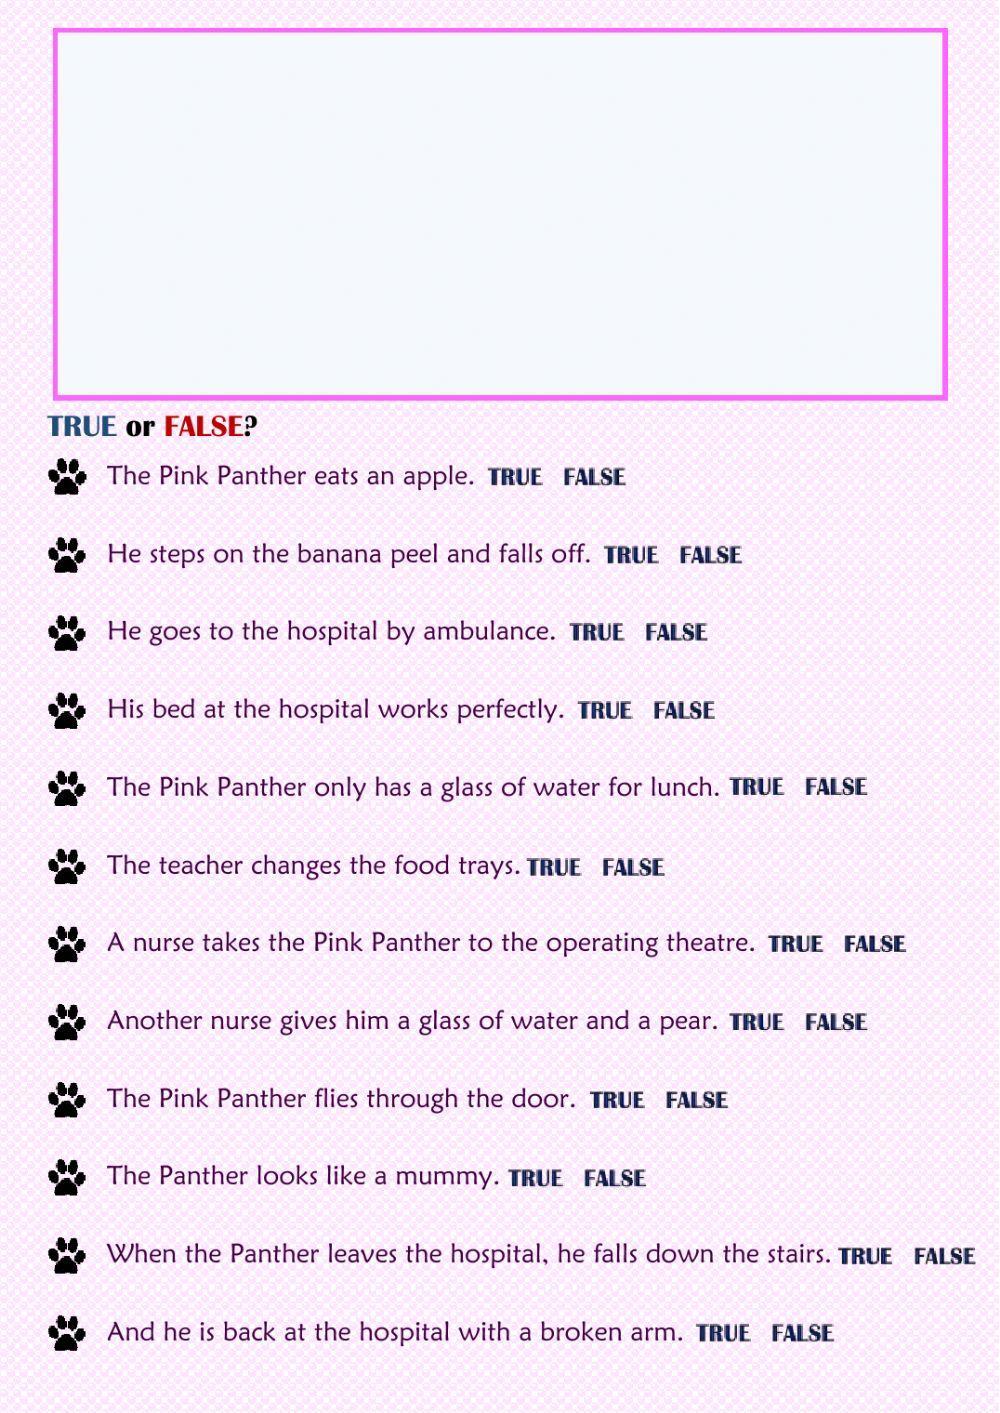 The Pink Panther - video task